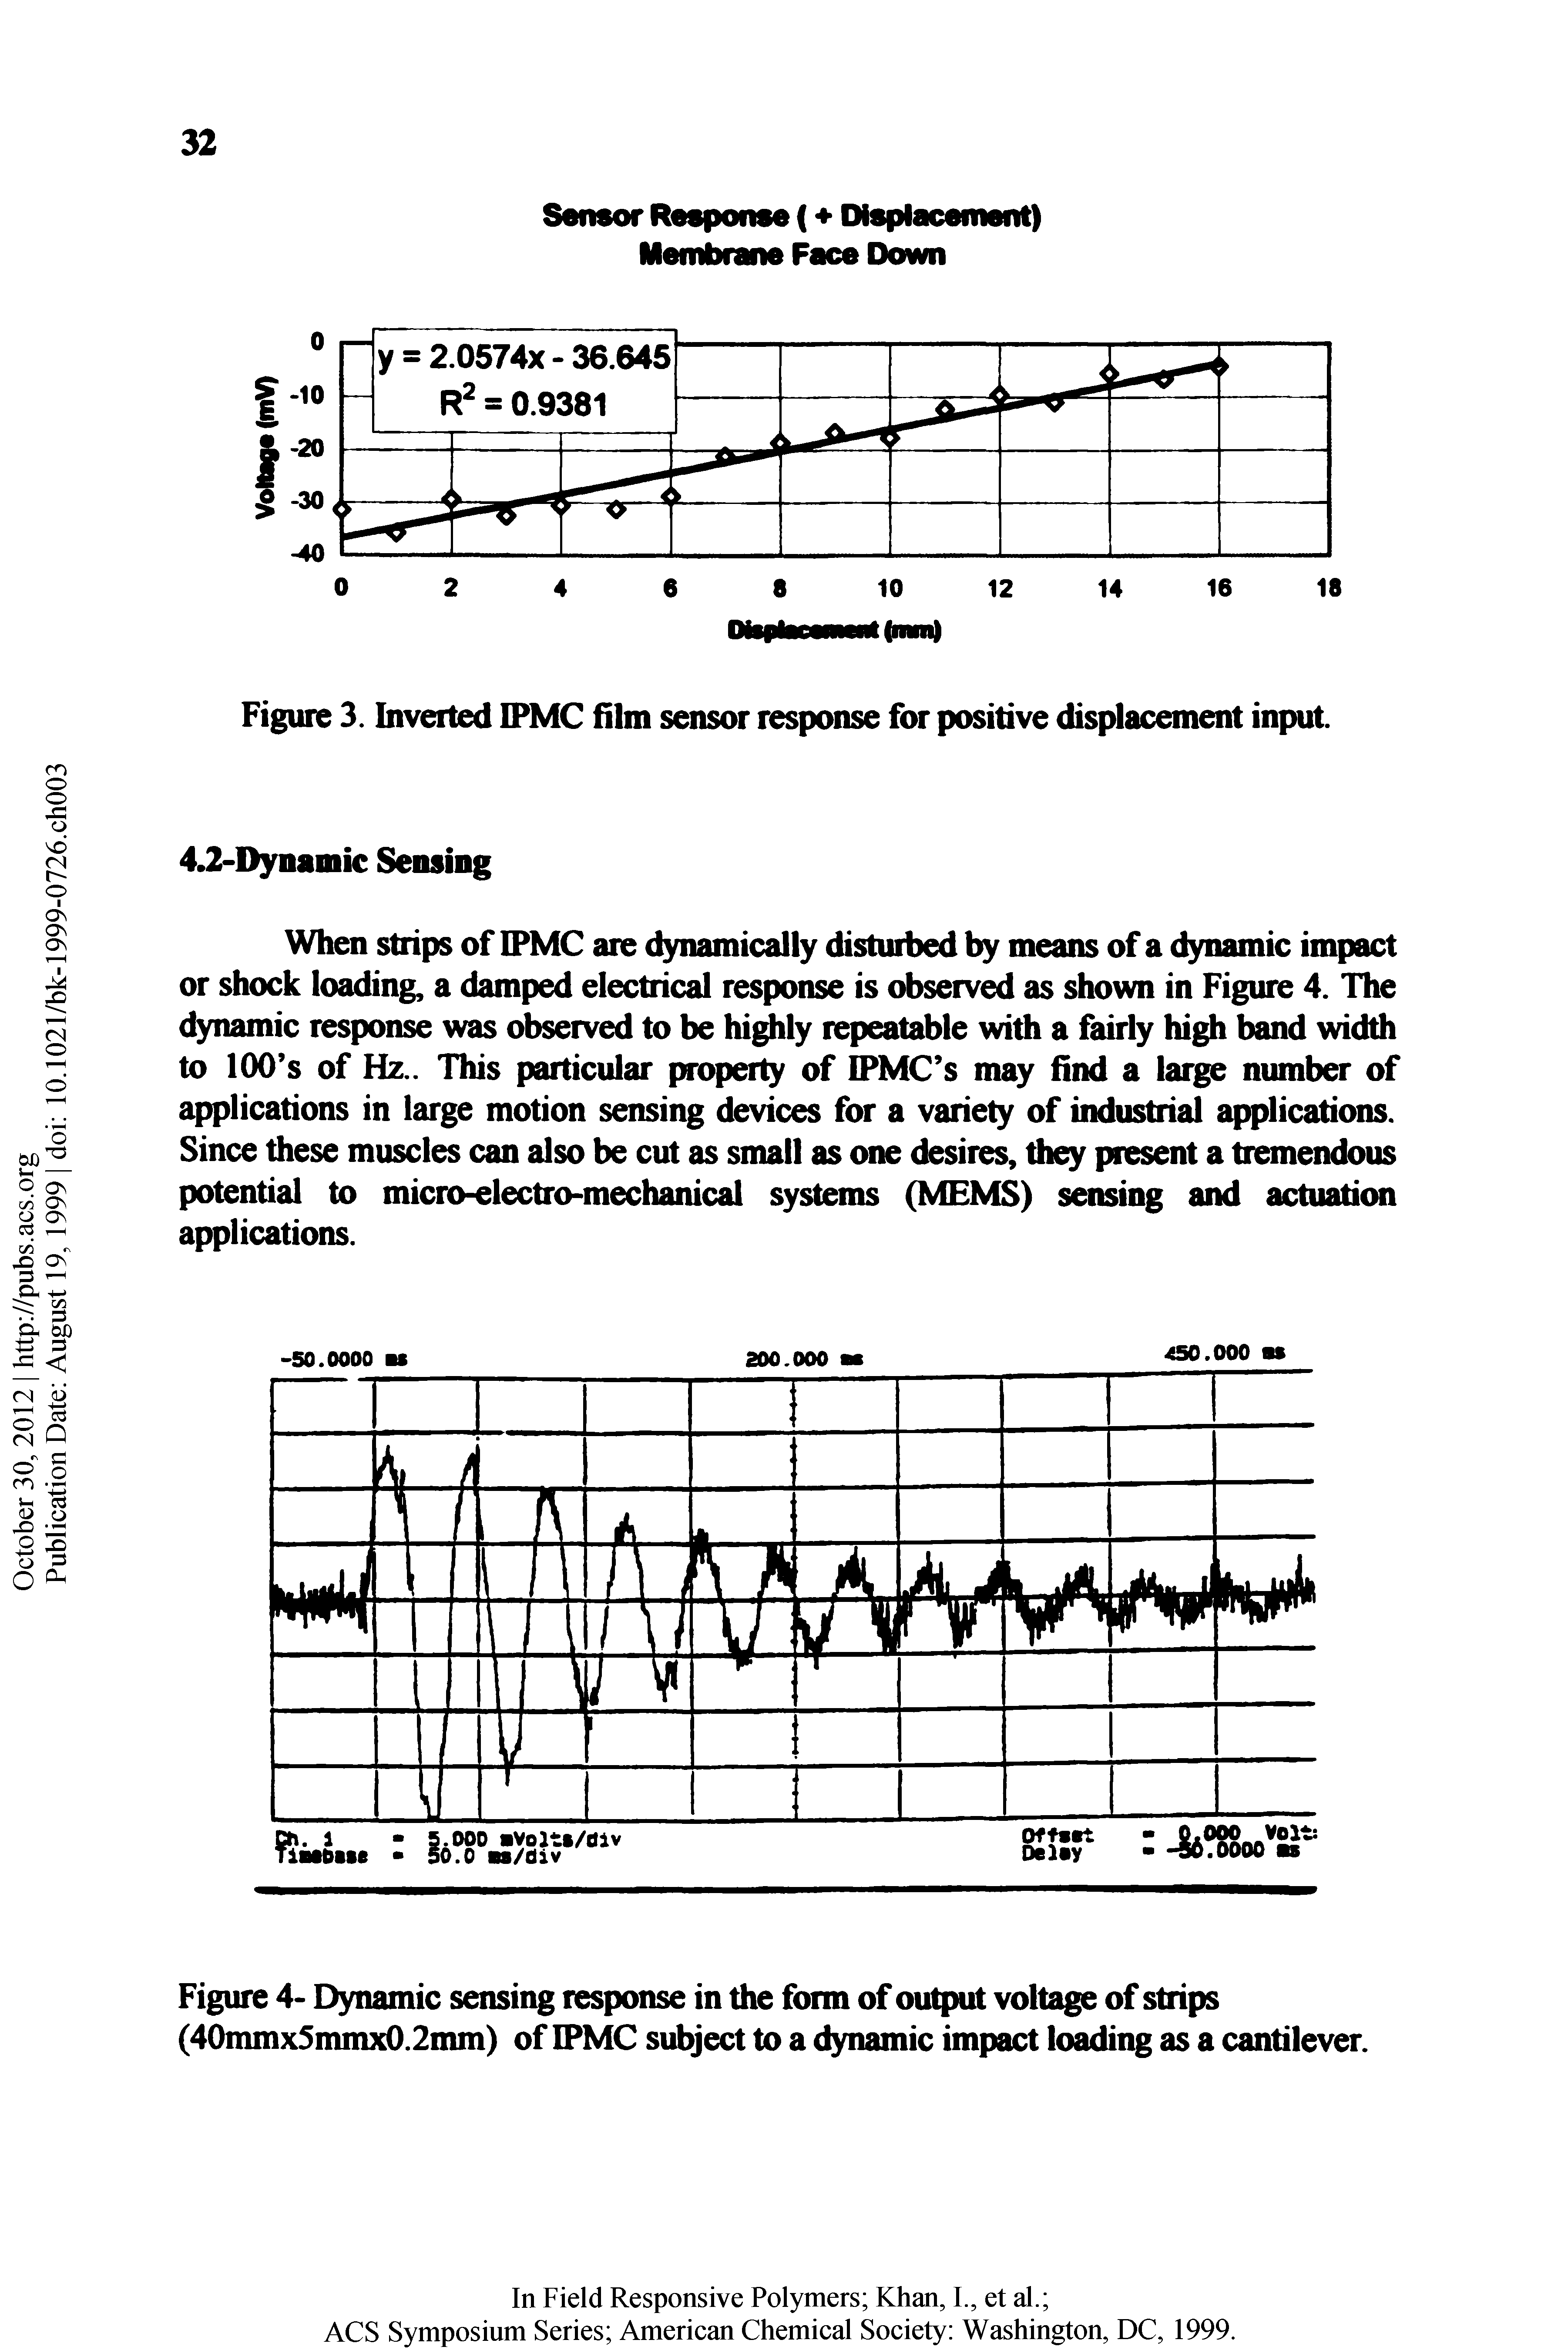 Figure 4- Dynamic sensing response in the form of output voltage of strips (40mmxSmmx0.2mm) of IPMC subject to a dynamic impact loading as a cantilever.